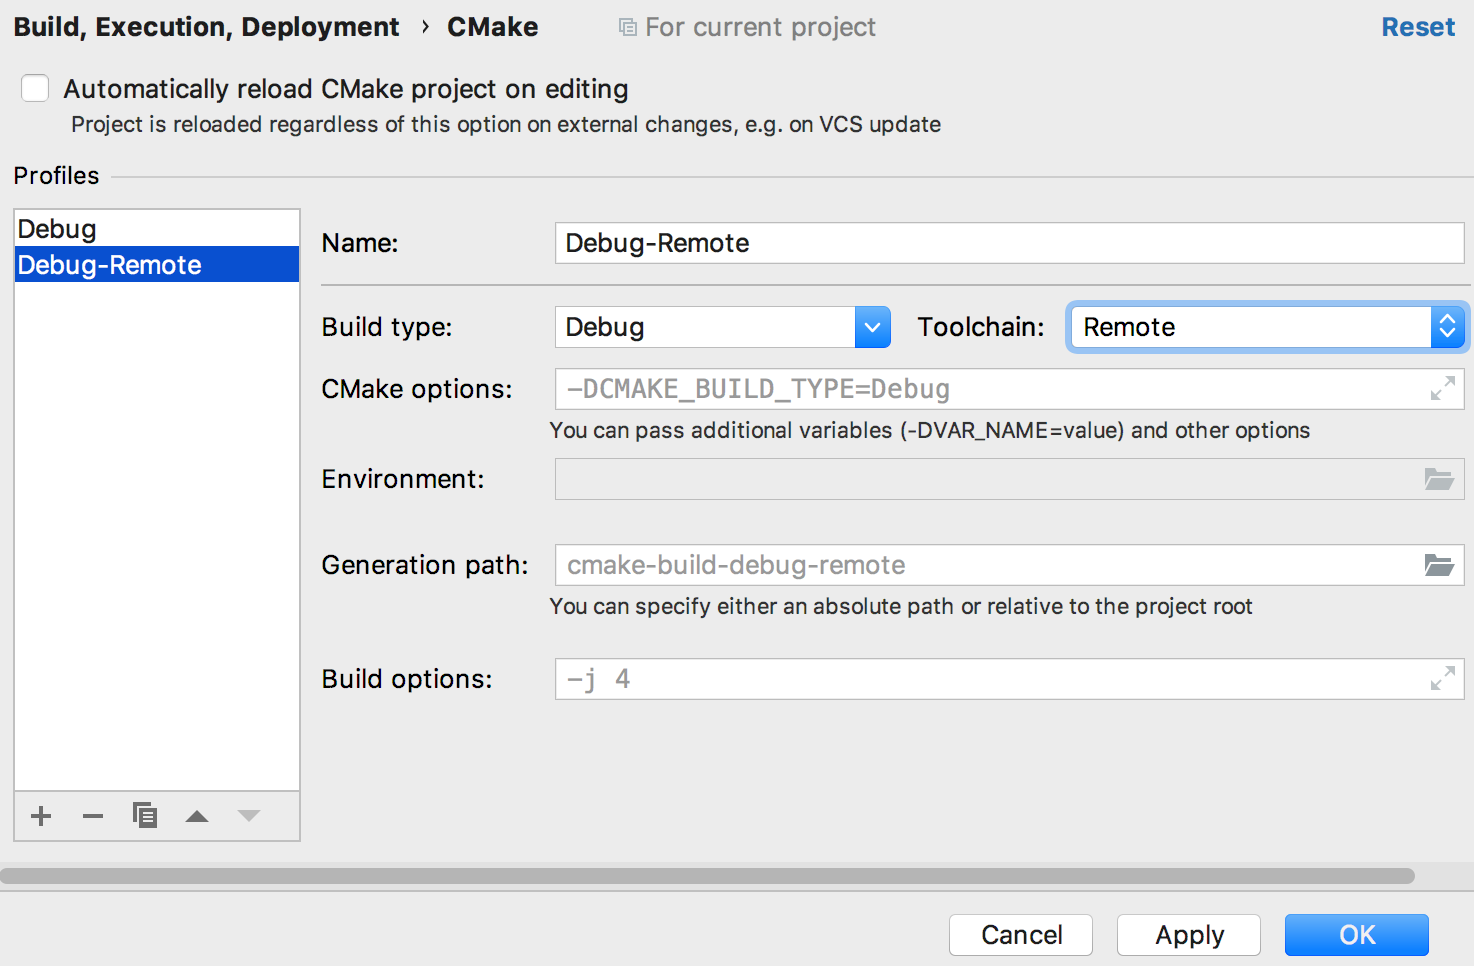 cmake profile for the remote toolchain